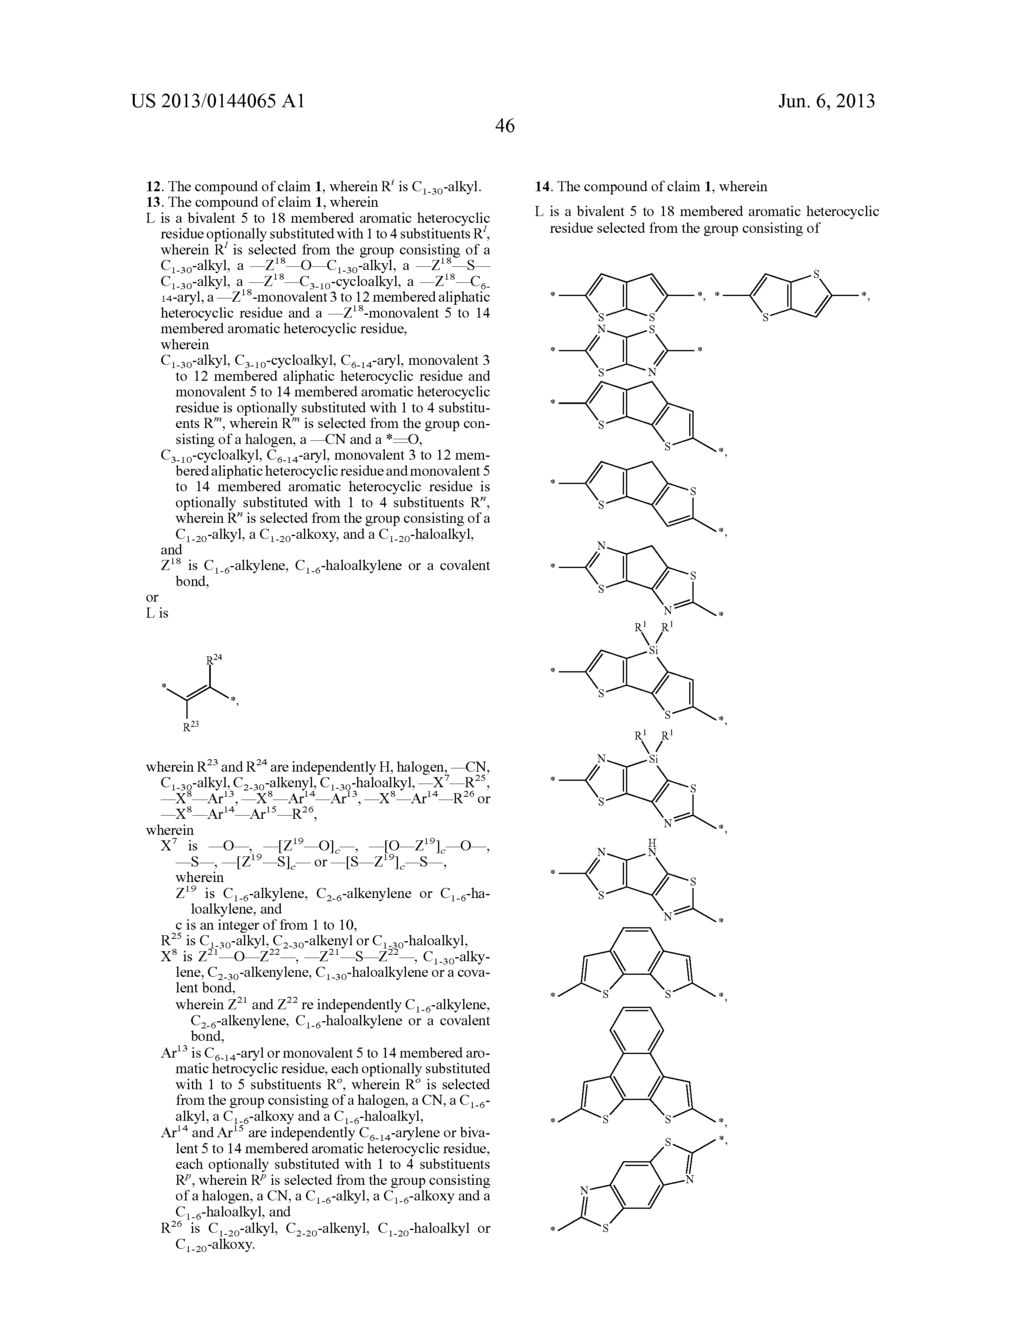 SEMICONDUCTOR MATERIALS PREPARED FROM BRIDGED BITHIAZOLE COPOLYMERS - diagram, schematic, and image 48